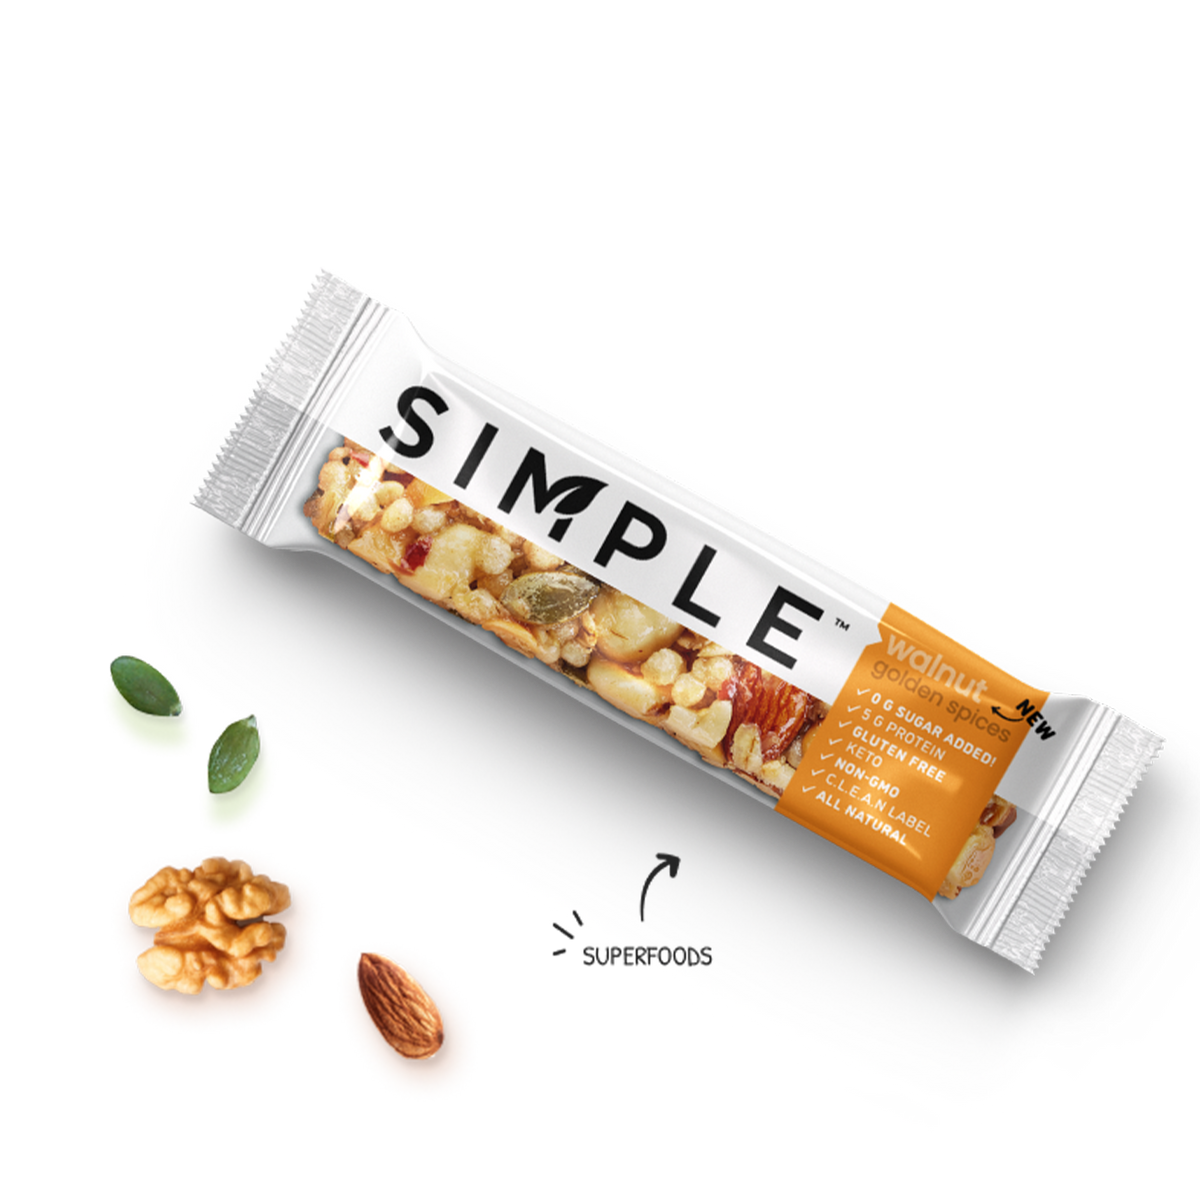 snack bar named SIMPLE, the flavor is walnut and golden spices and spread nuts